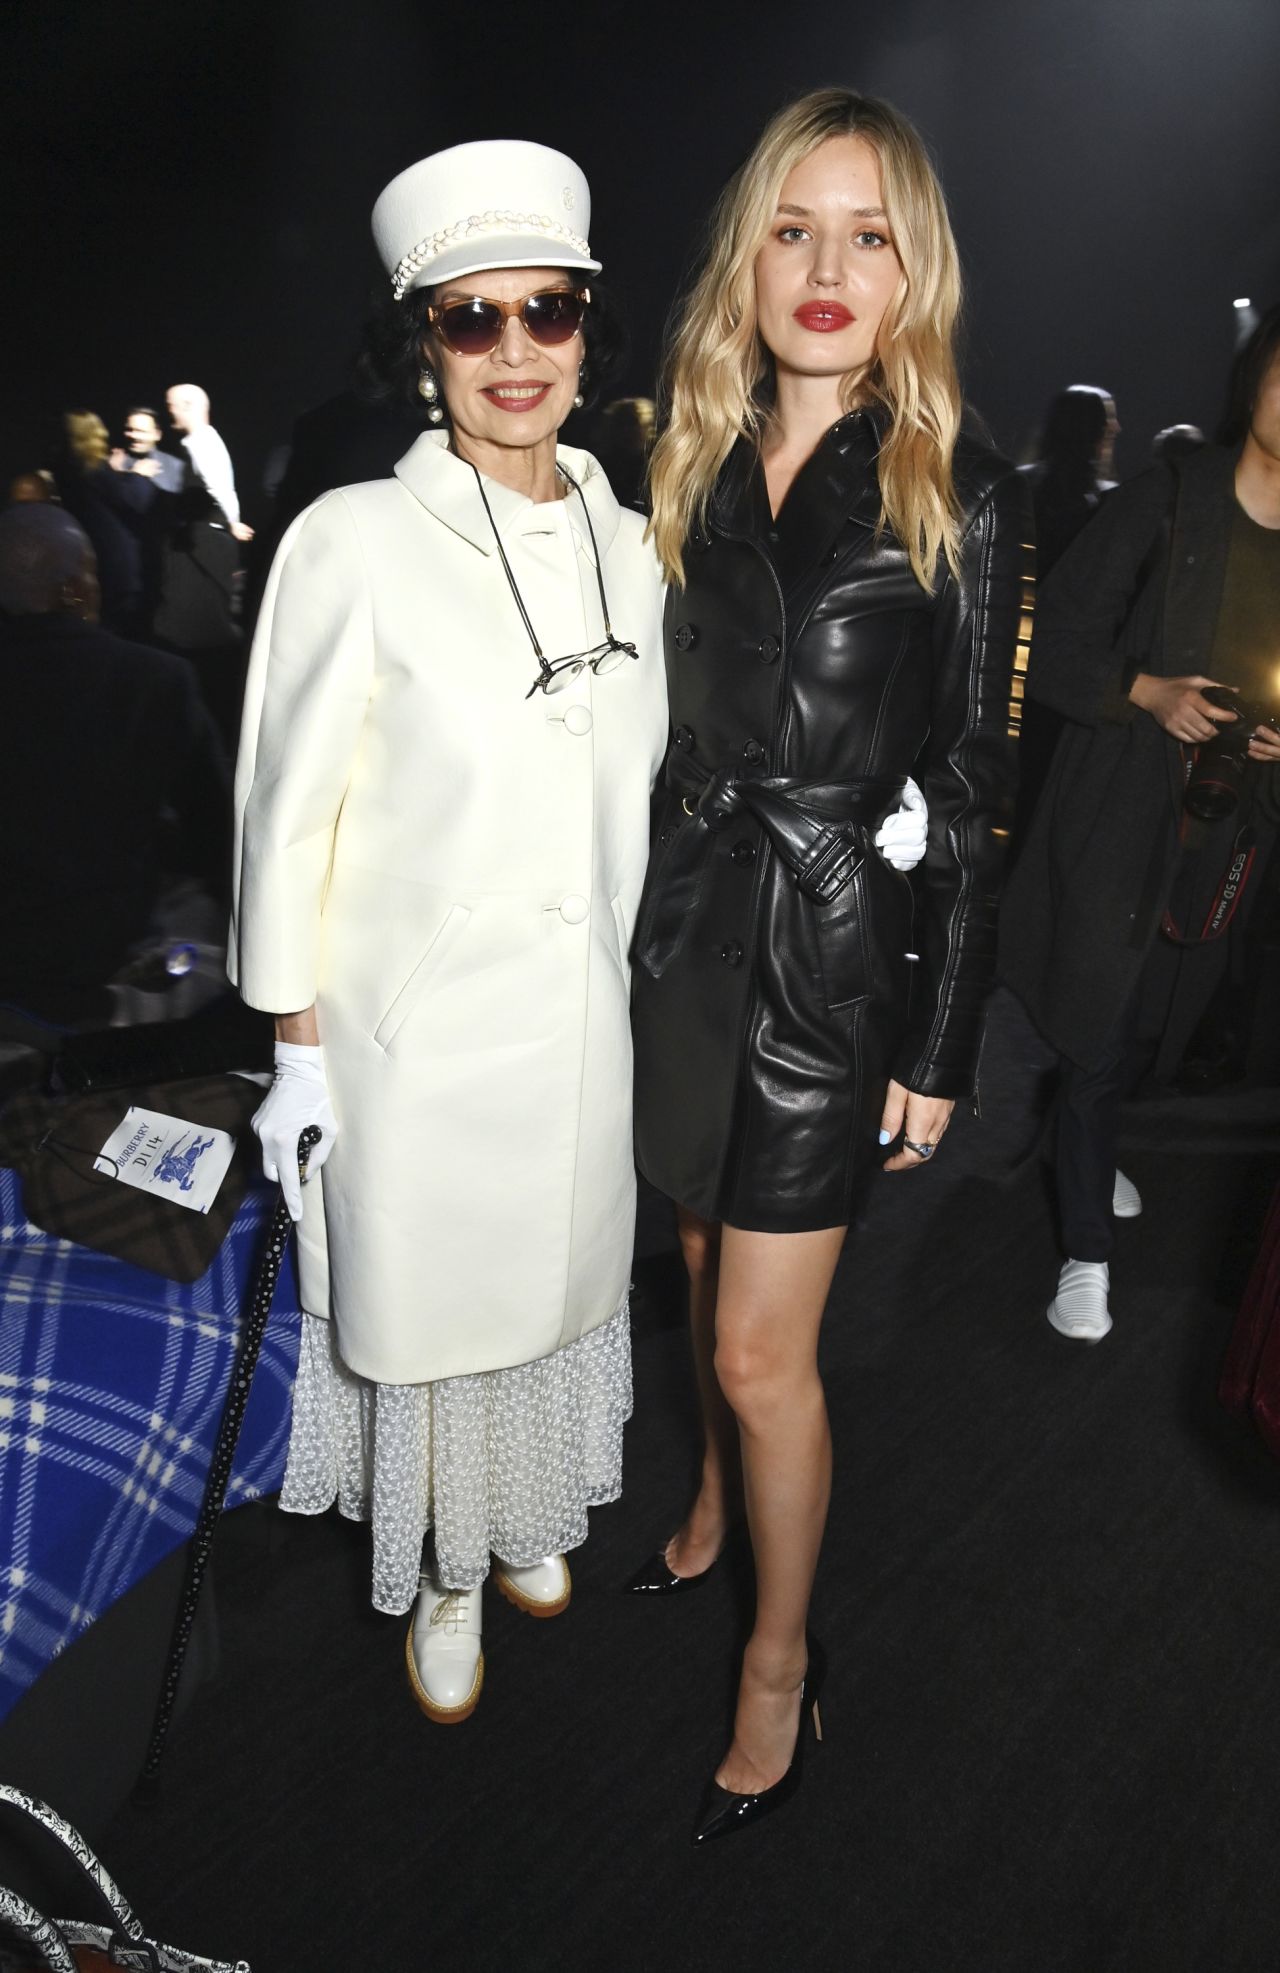 Bianca Jagger and Georgia May Jagger attend the Burberry show.